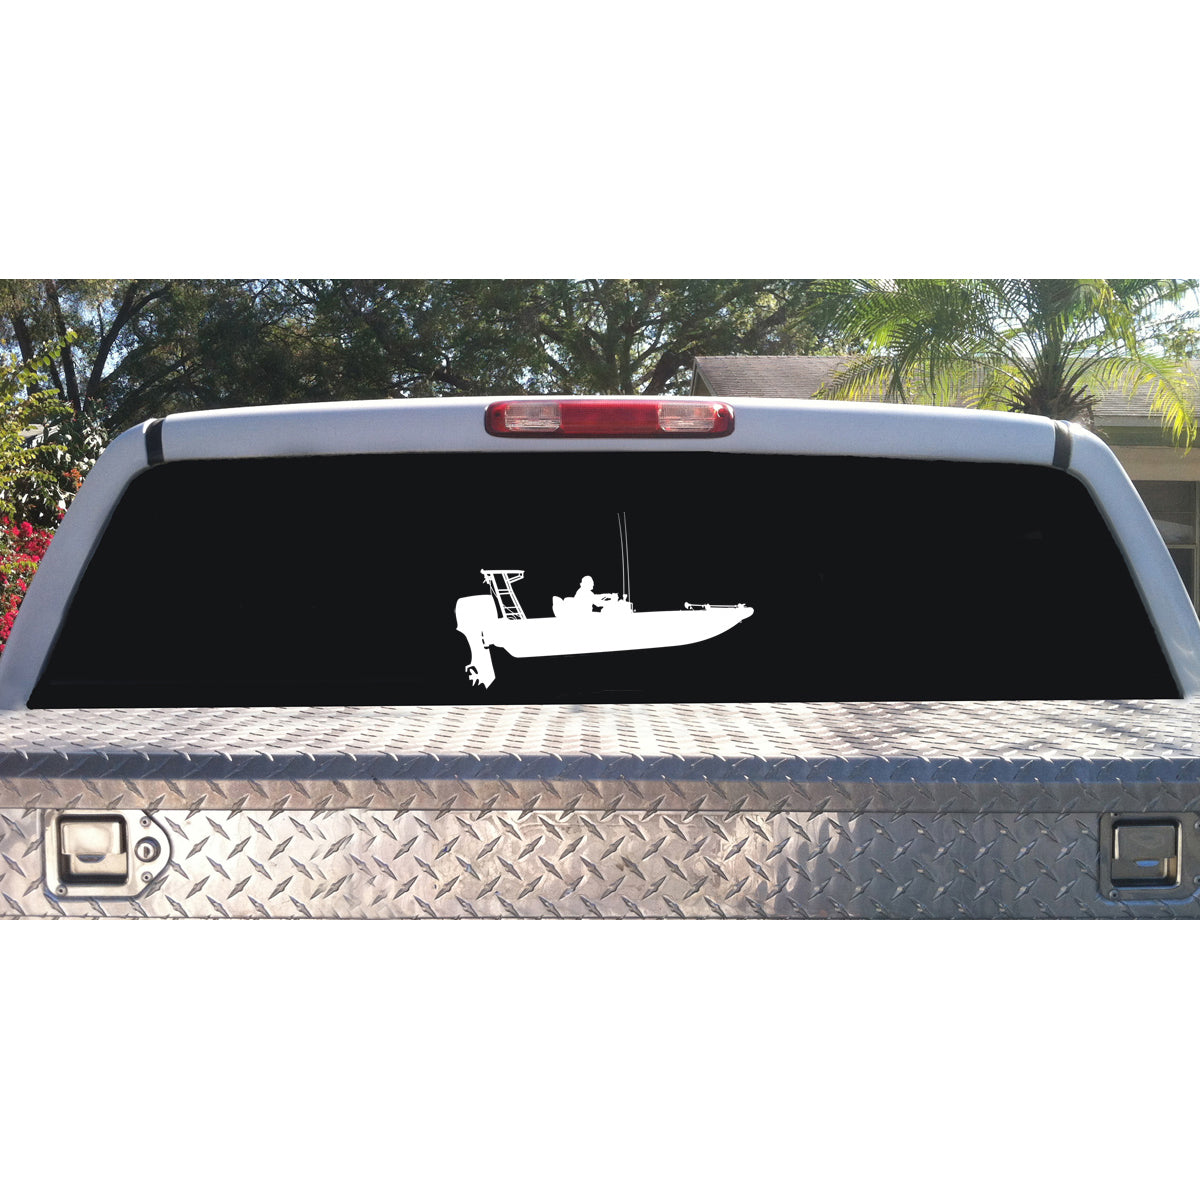 Fishing Stickers Pack 14 For Boats Cars Windows Kayak New Outdoor Decals Set